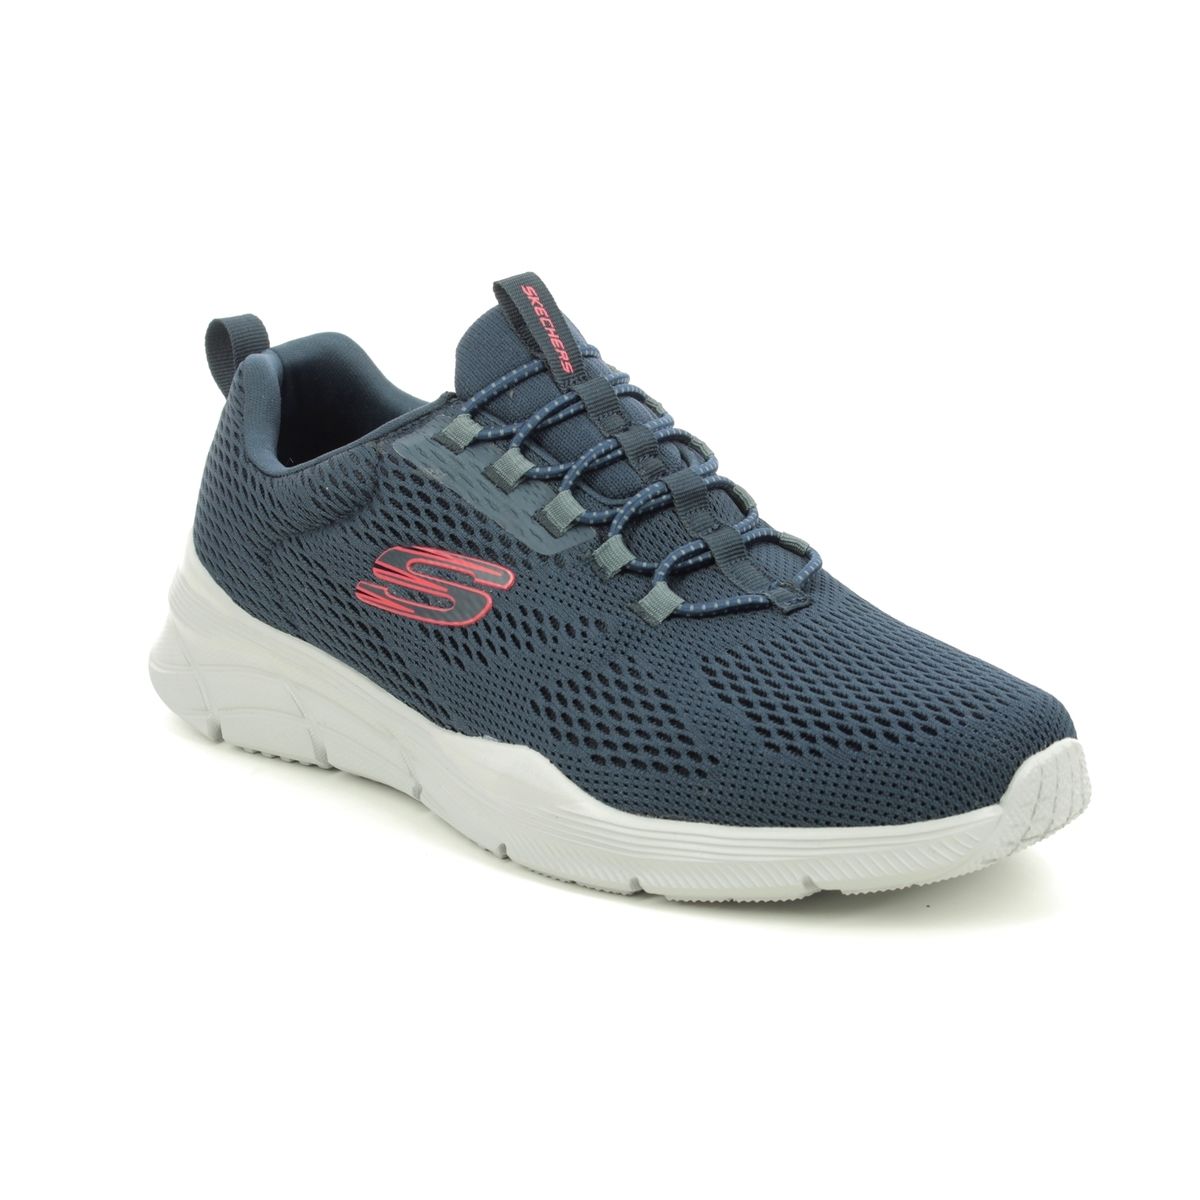 Skechers Equalizer 4.0 Relaxed Fit 232026 NVY Navy trainers